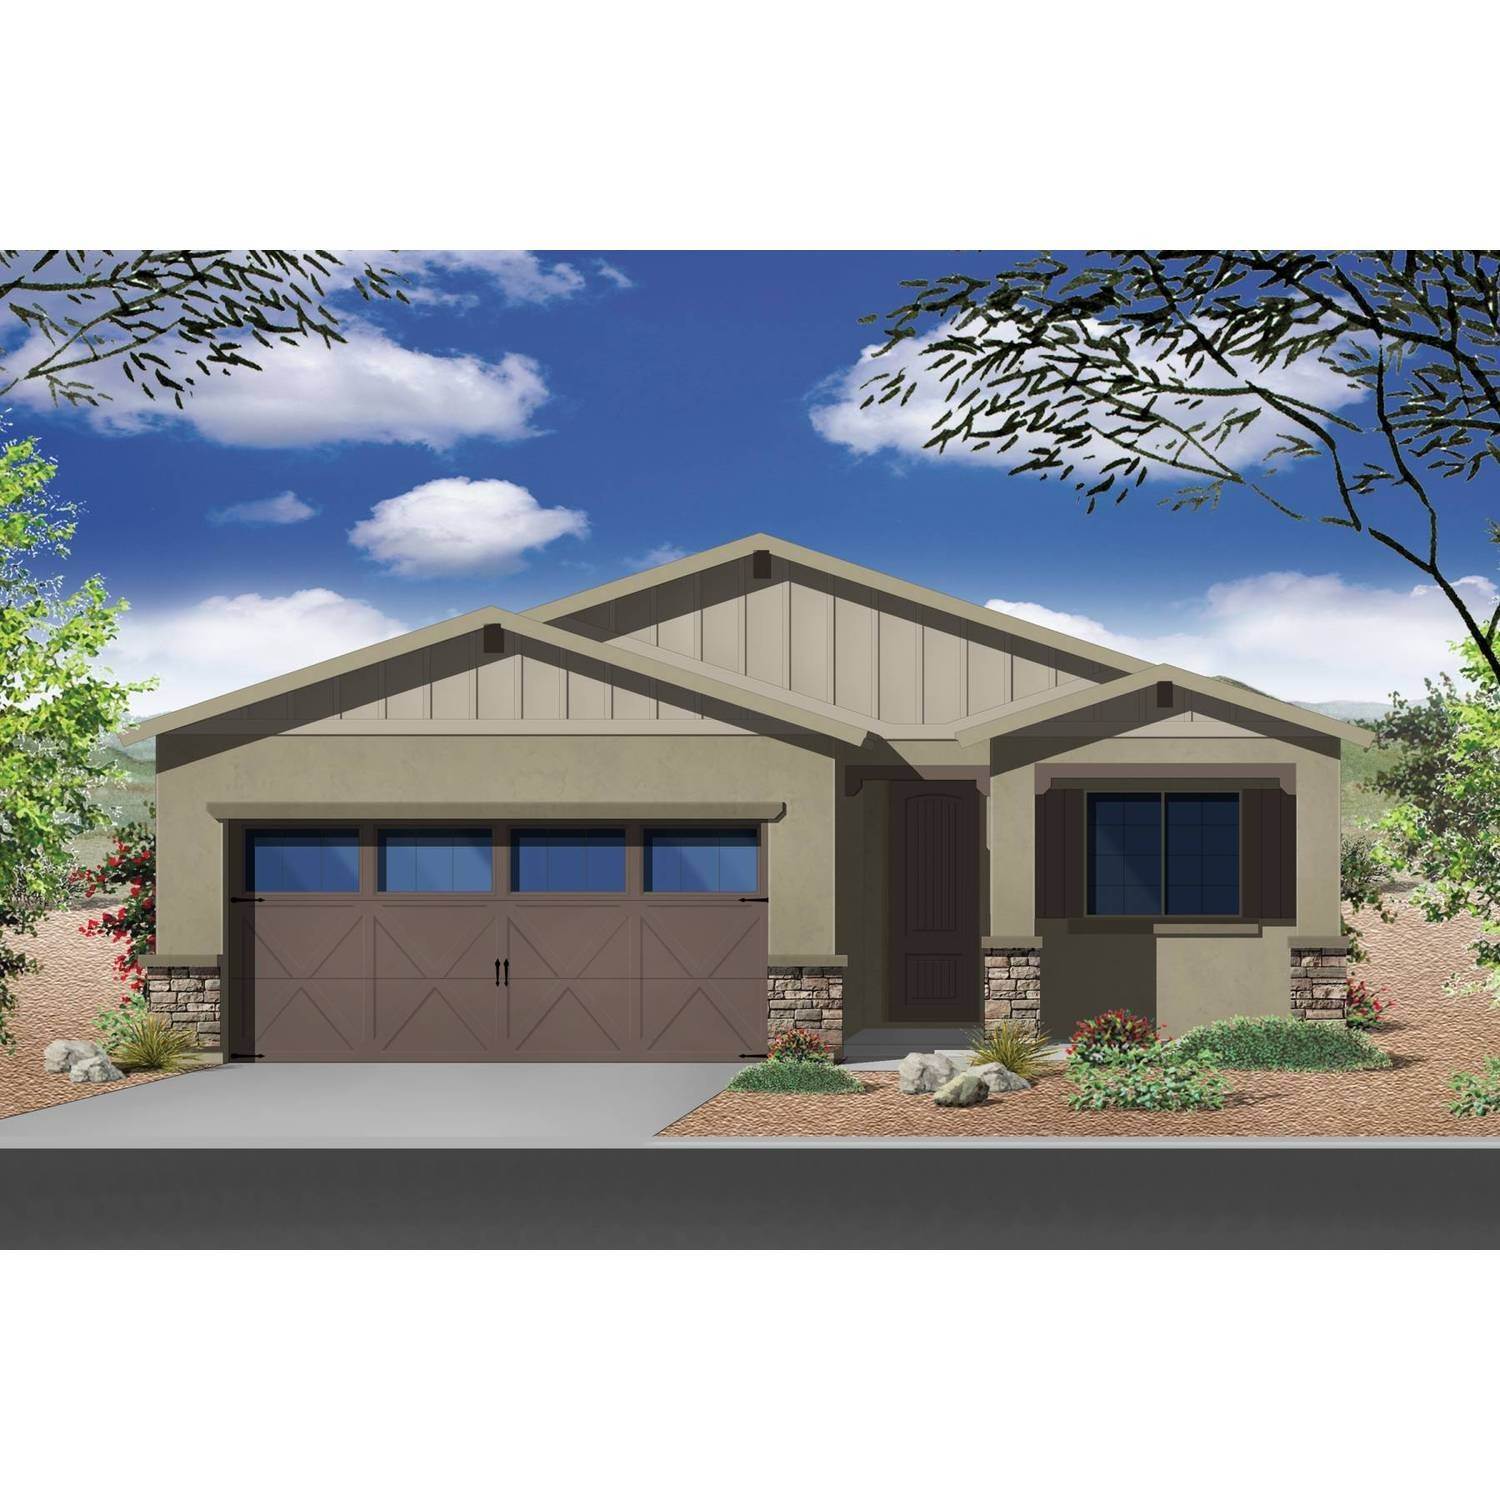 Single Family for Sale at Waddell, AZ 85355